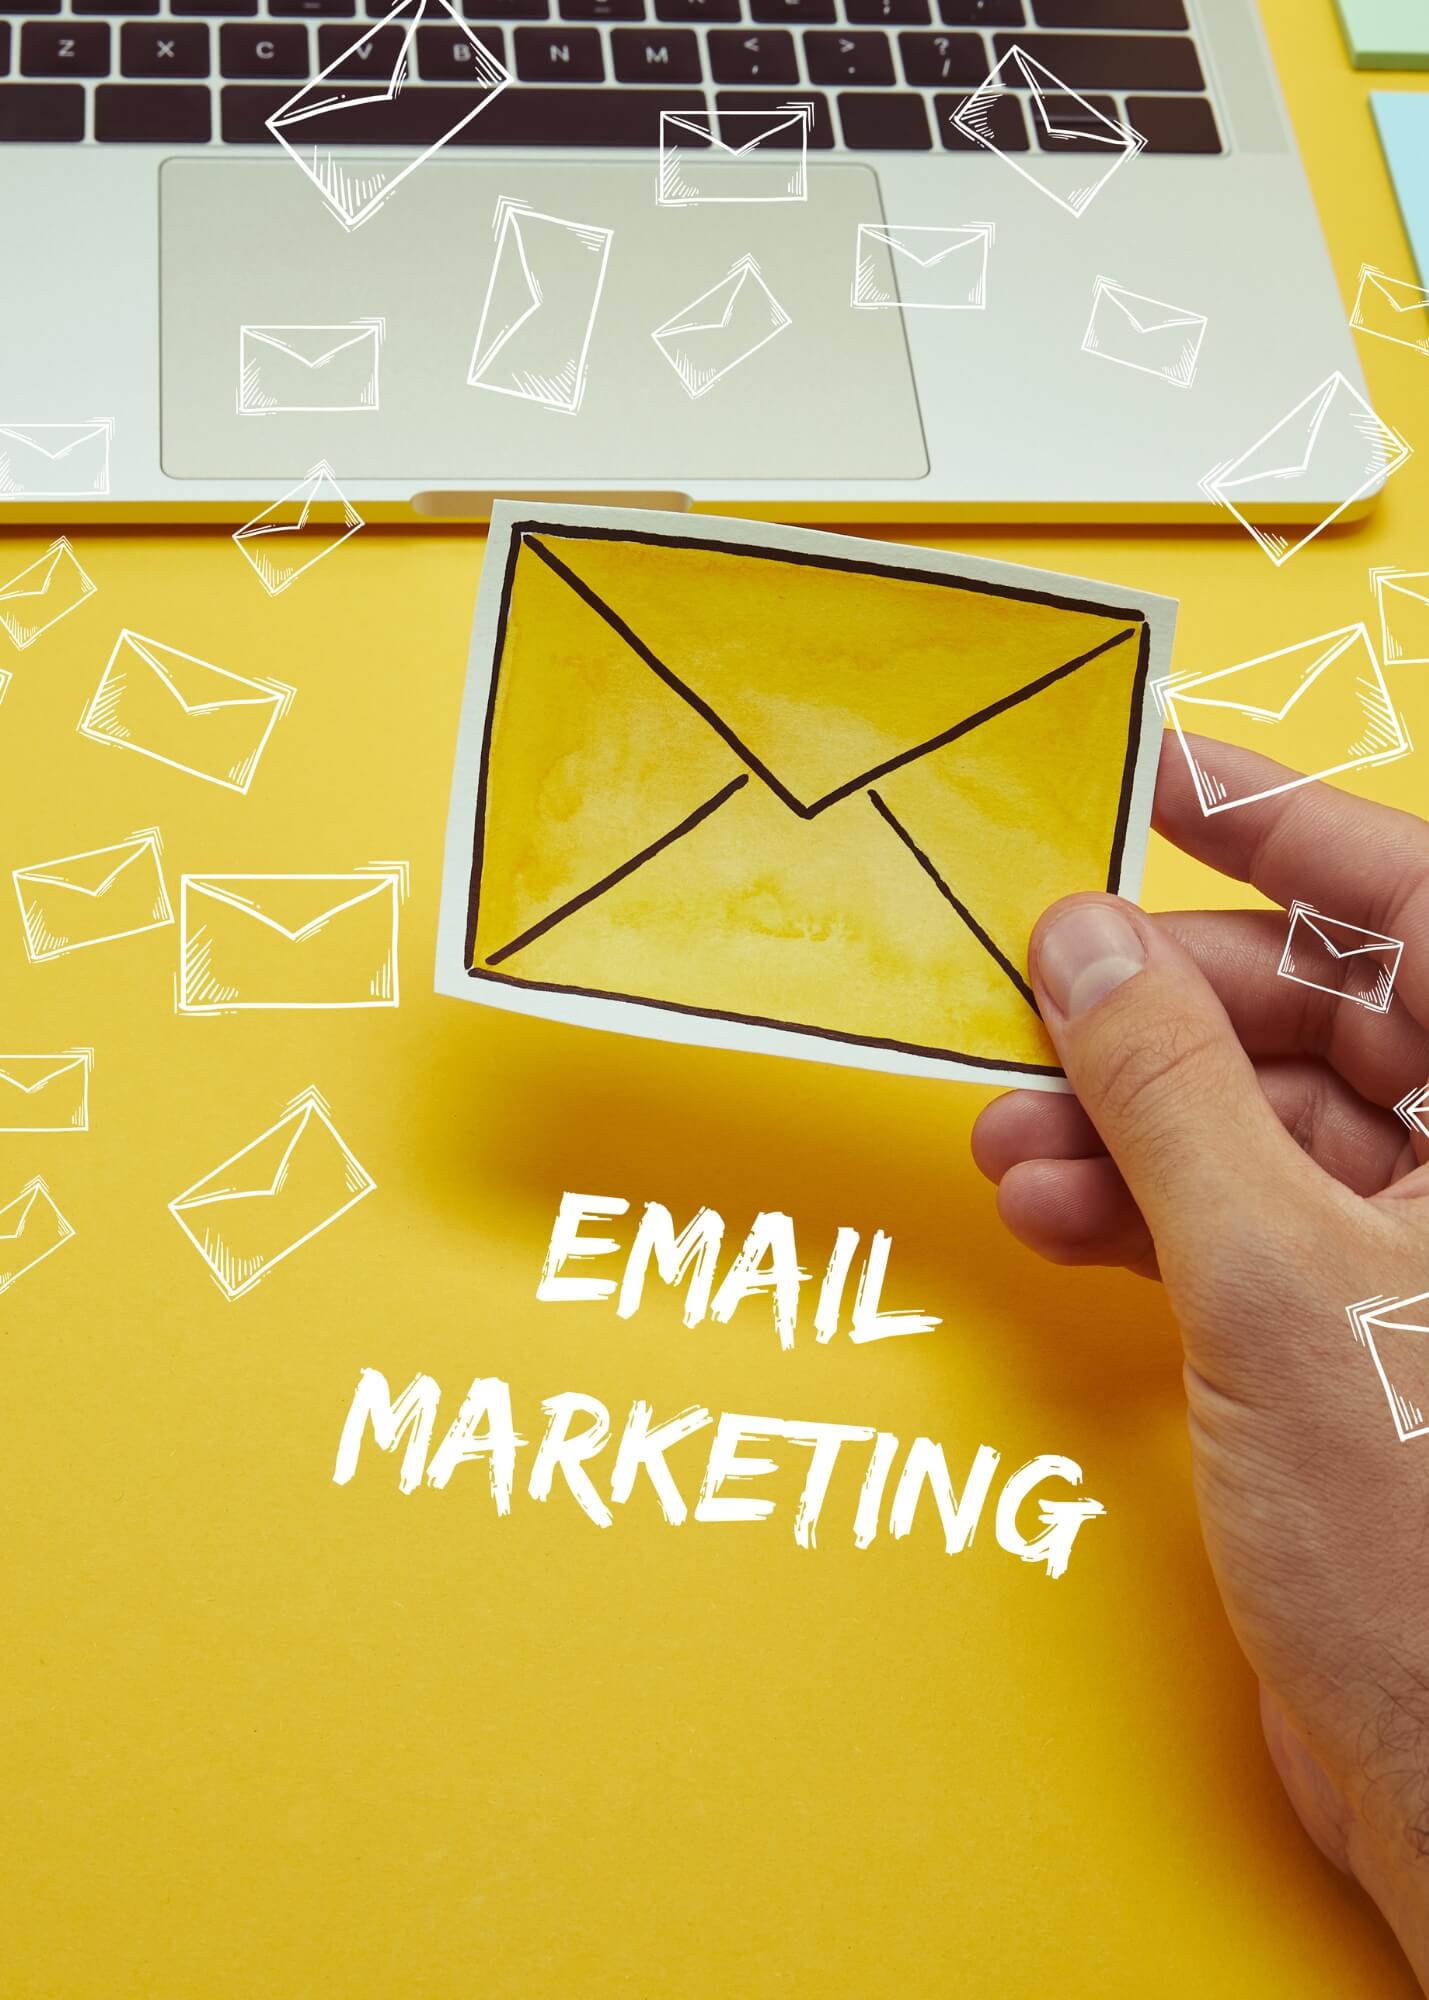 Blog: Build Connections with Email Marketing